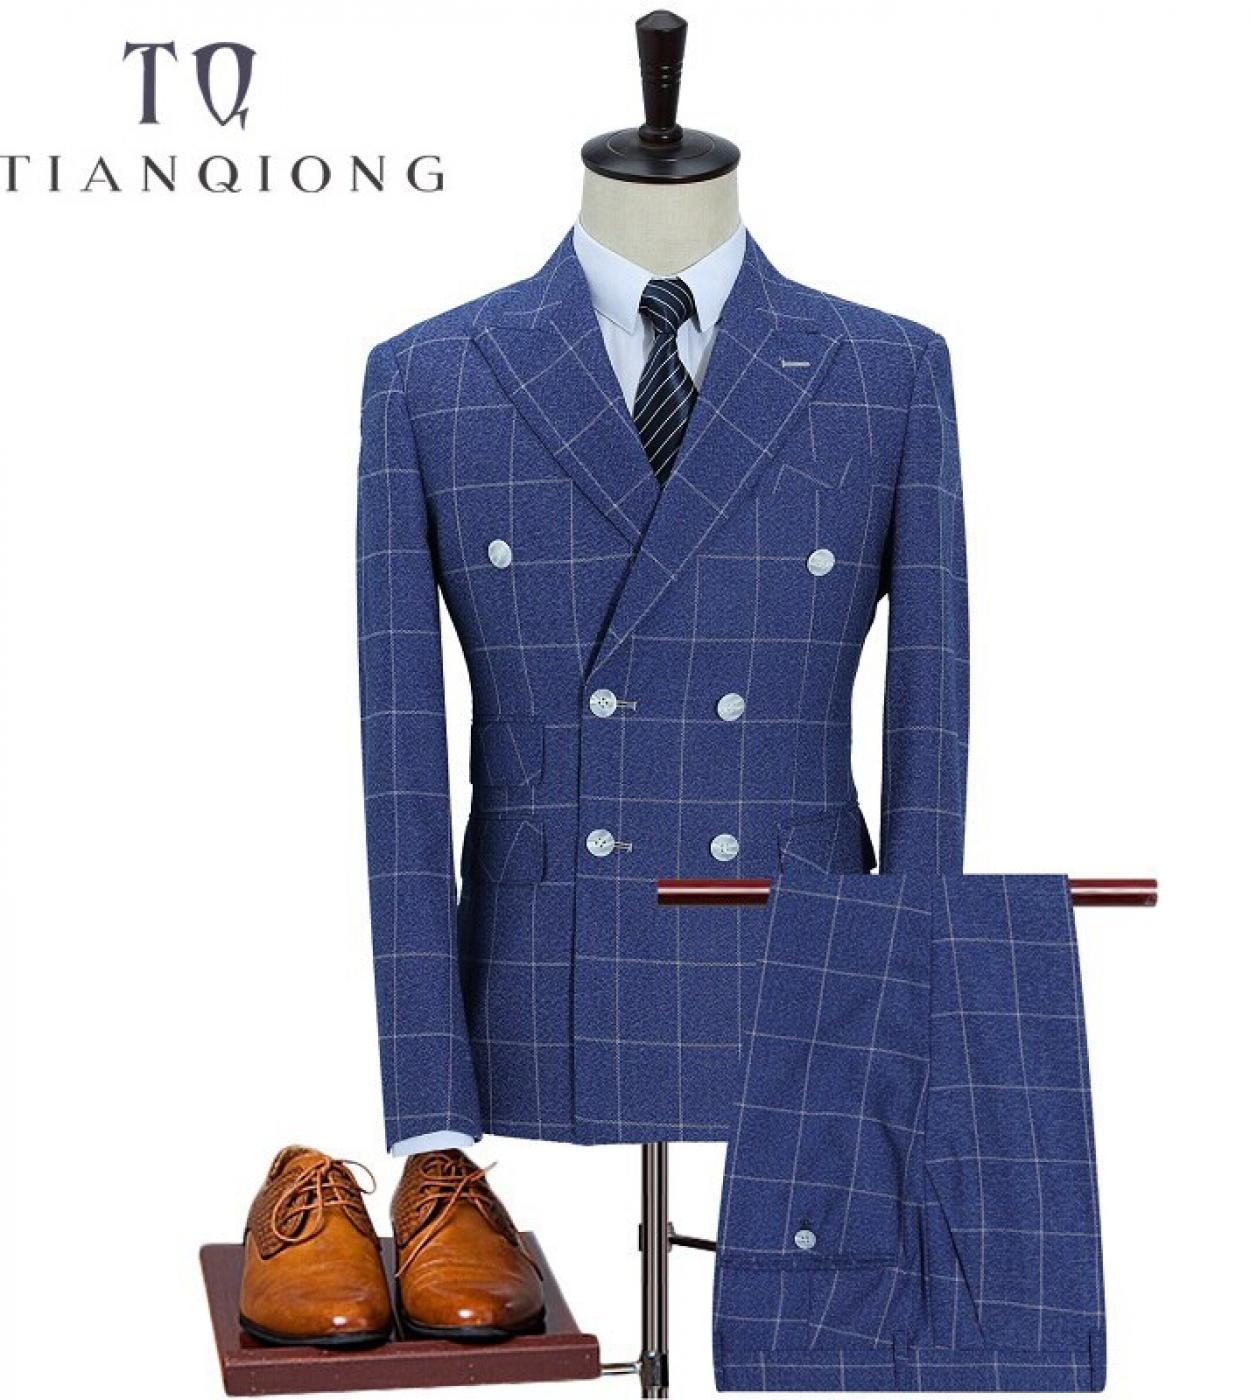 Tian Qiong Brand  New Arrival High Quality Fashion Double Breasted Suits Men,streak Mens Suit,size M 5xl,jacket Pants